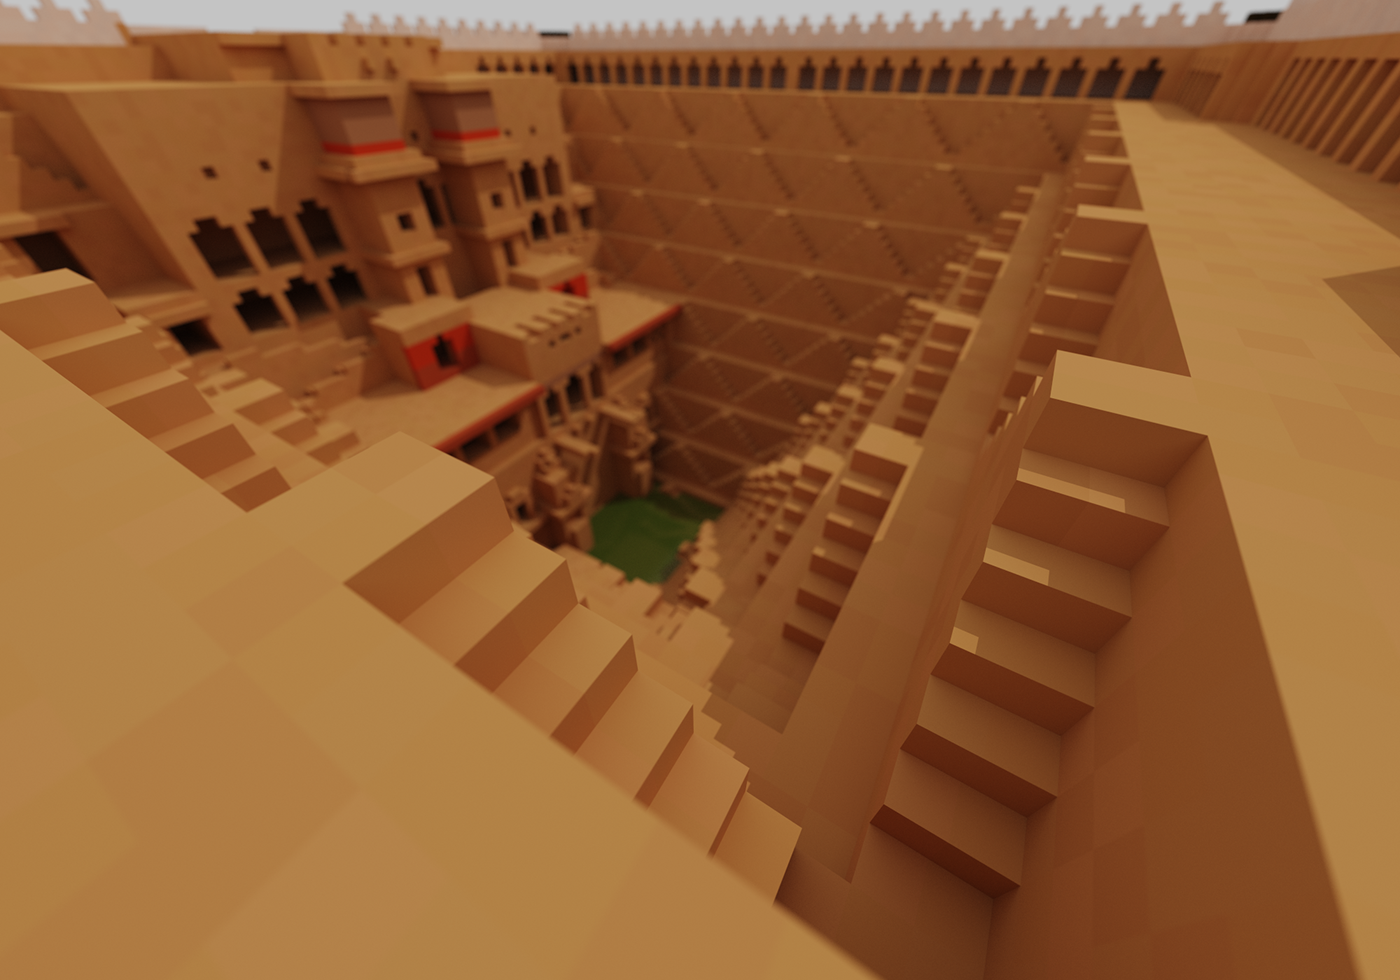 voxel art voxel chand baori Rajasthan India Step Well well Magicavoxel